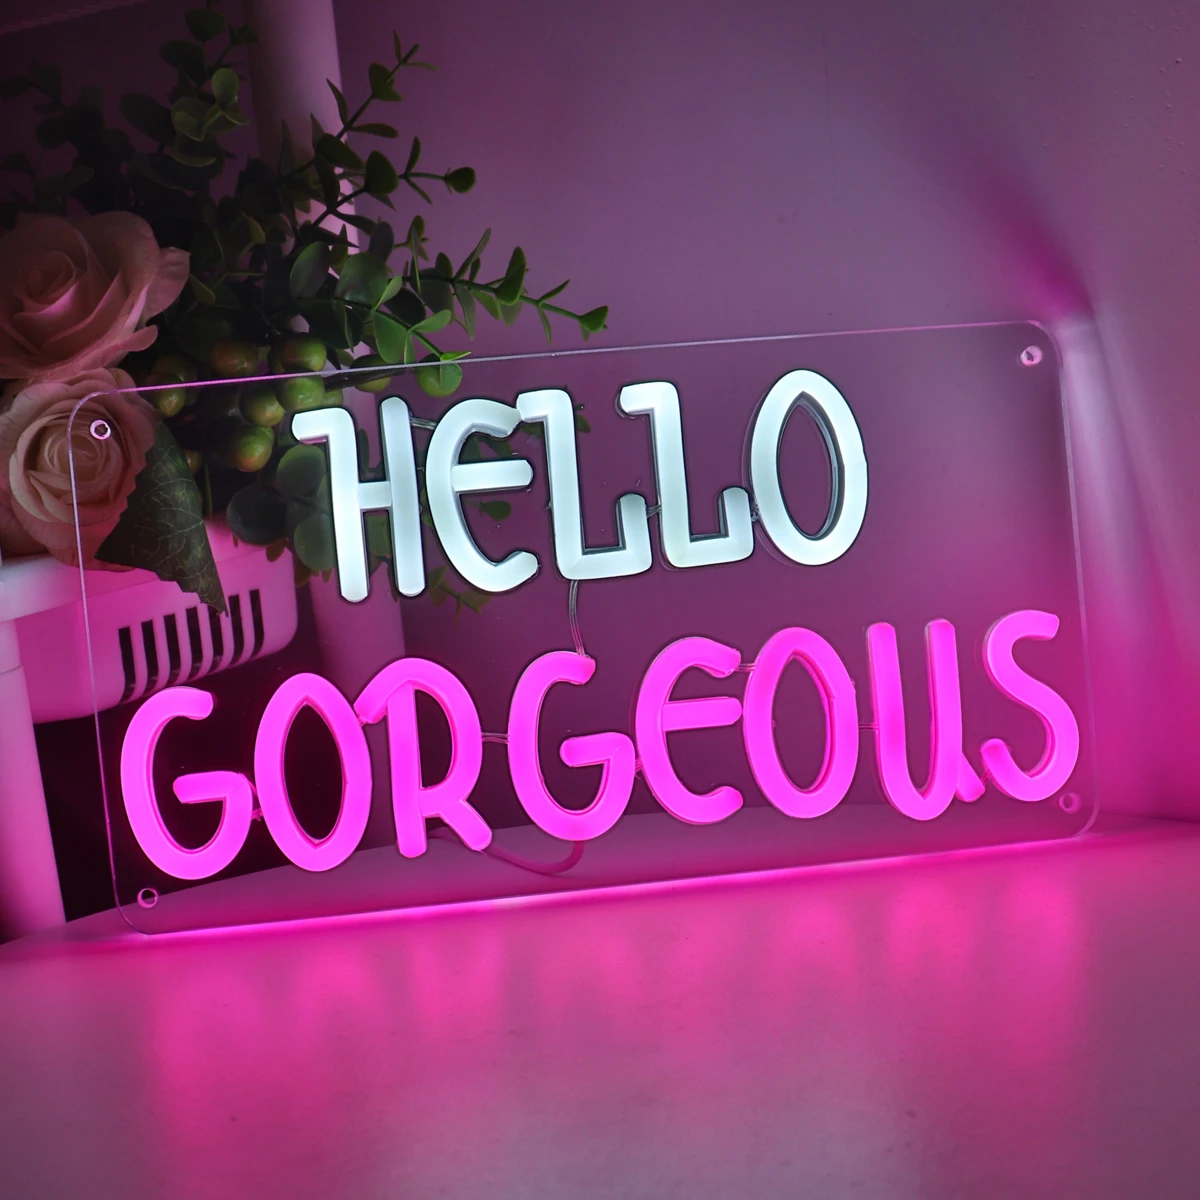 1PC Super Bright Hello Gorgeous Wall LED Neon Art Sign For Girls Room Party Shop Saloon Gallery Decoration 11.22''*5.98'' 14 19cm kids patent leather shoes solid beige princess dress shoes for party bright bowtie knot rhinestones spring shoe